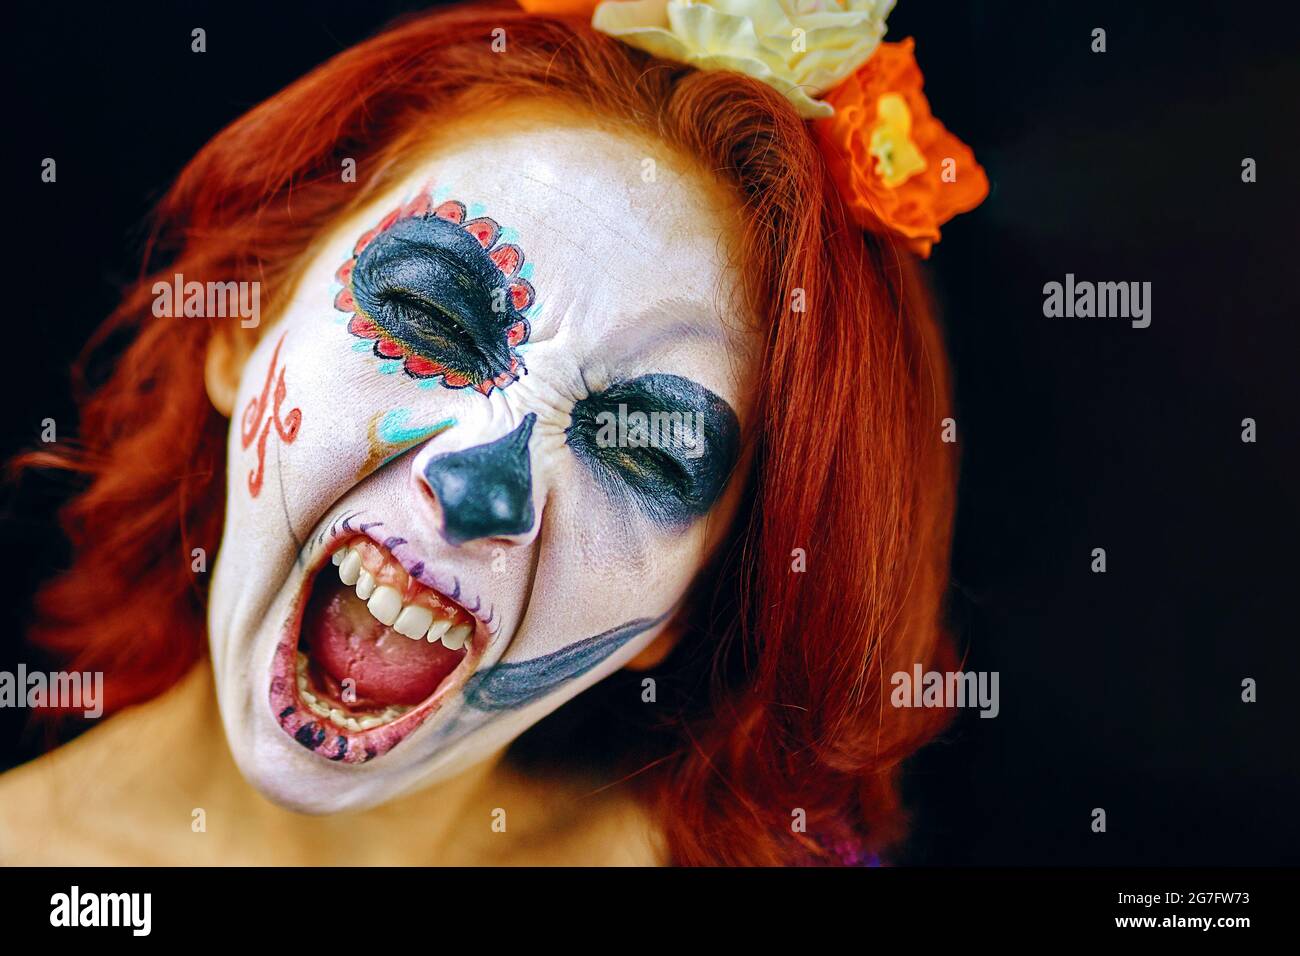 A young woman in day of the dead mask skull face art. Woman with skull makeup and red hair, screaming on dark background close up Stock Photo